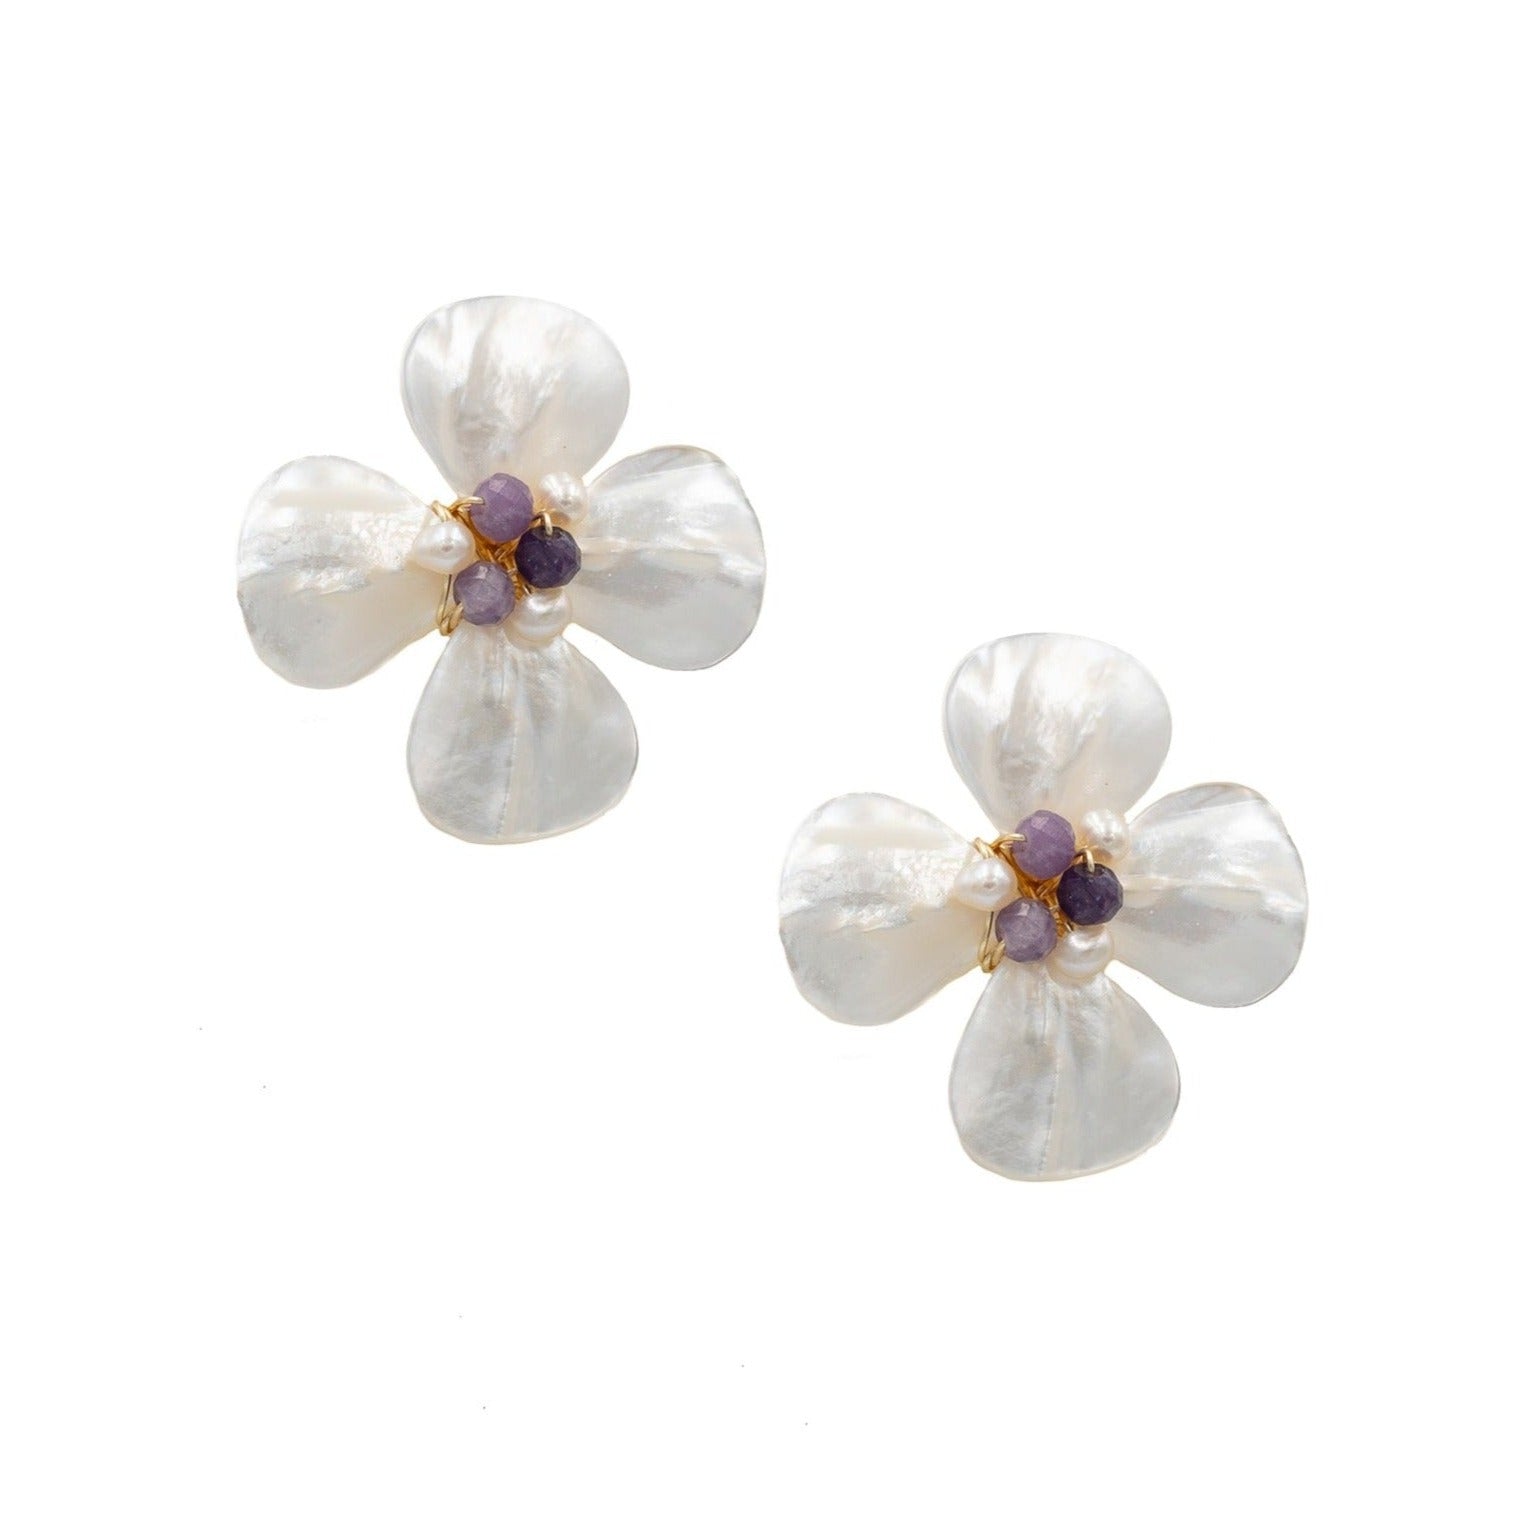 Poppy Earring, Lavender and Pearl